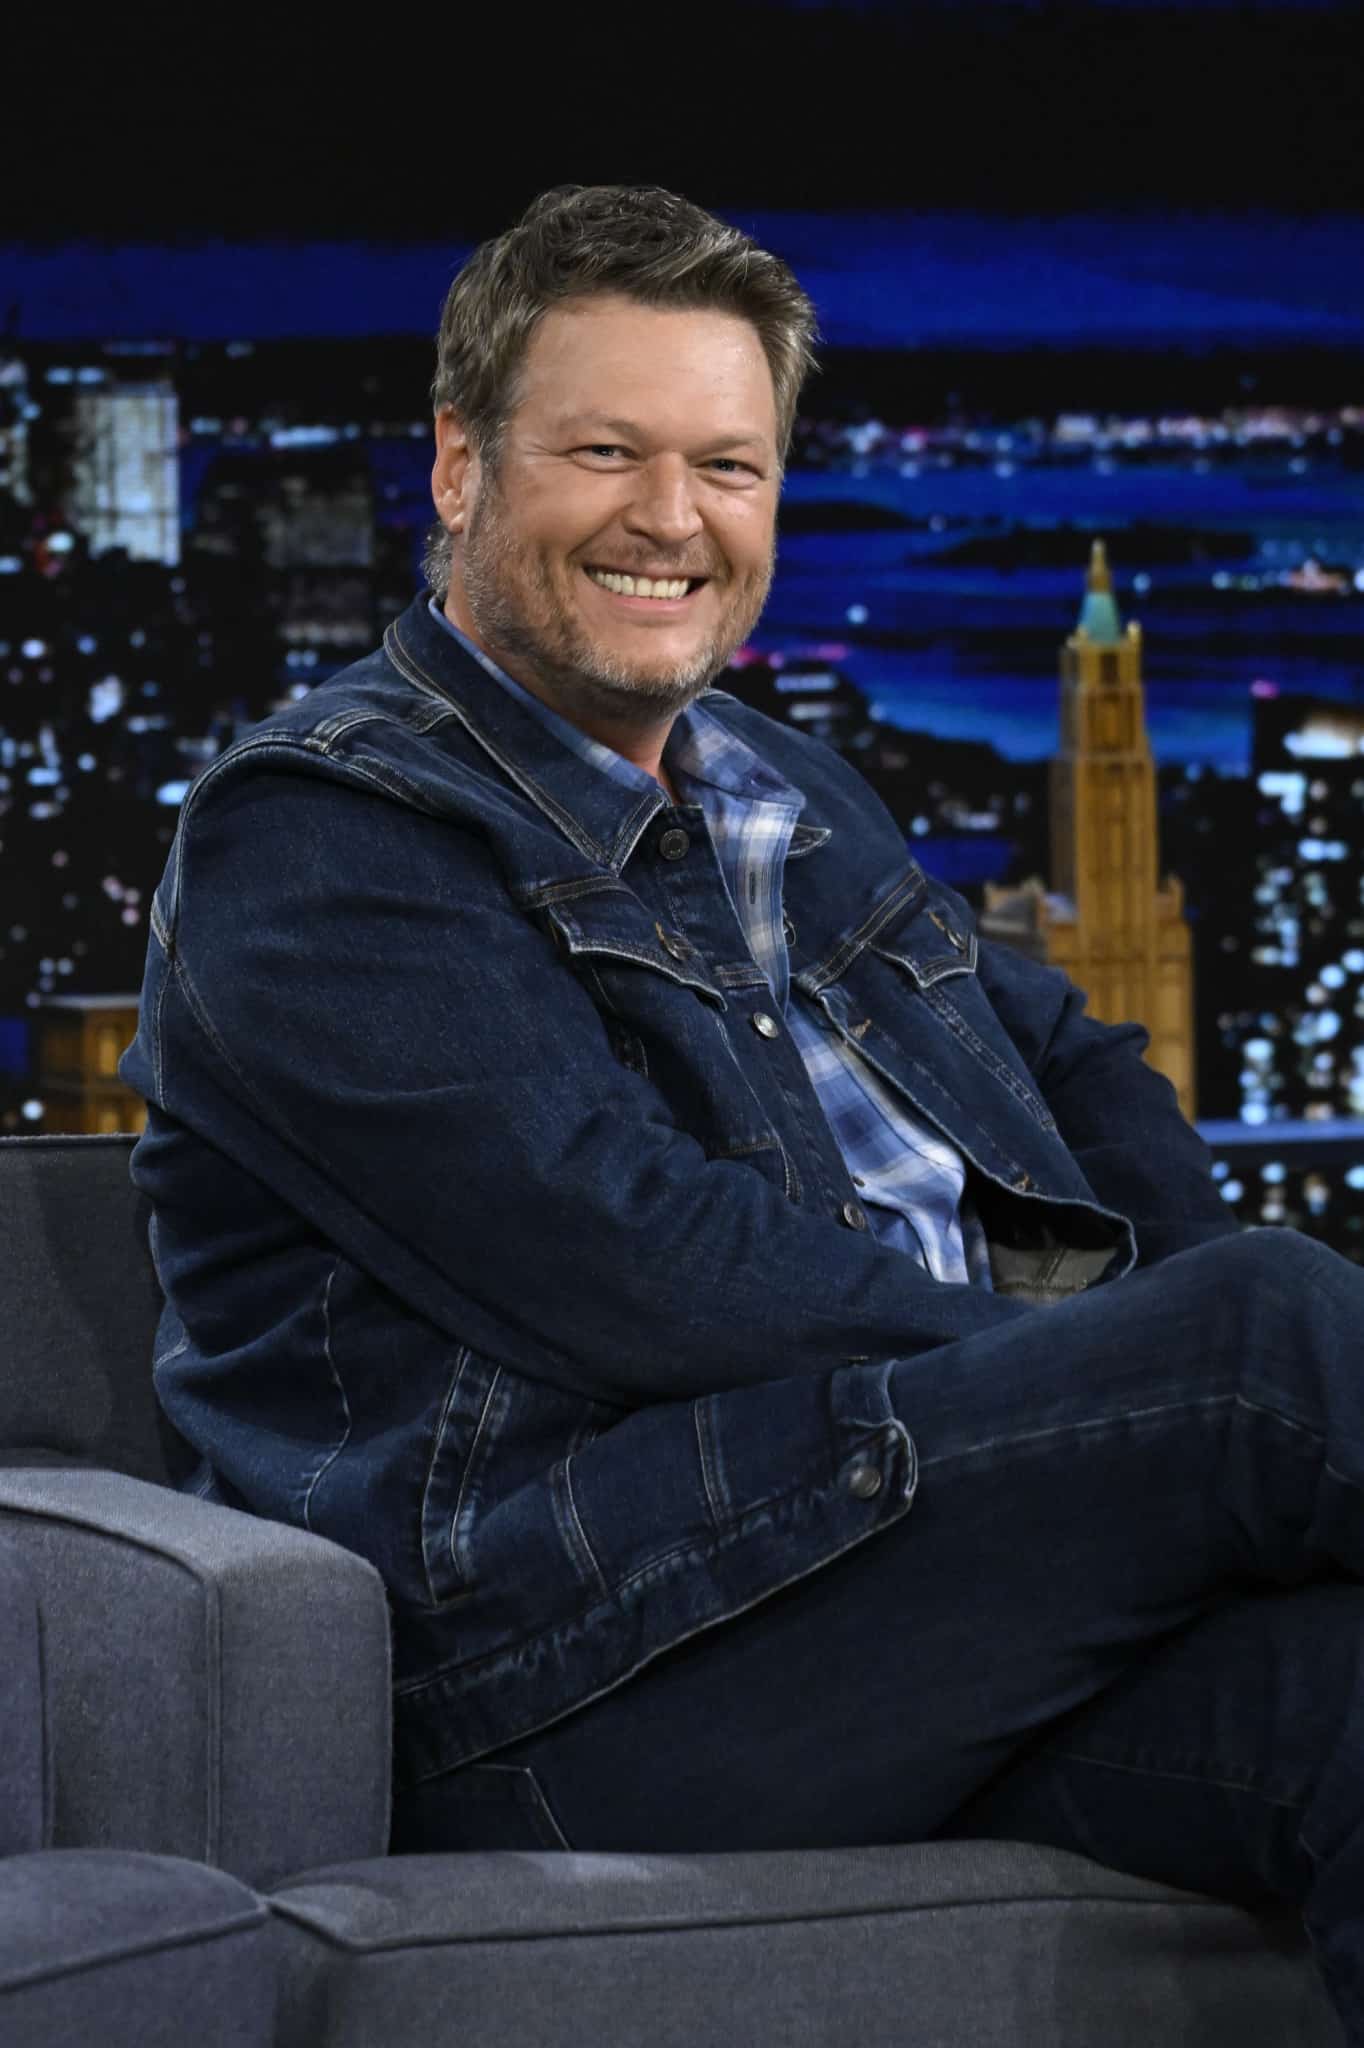 THE TONIGHT SHOW STARRING JIMMY FALLON -- Episode 1705 -- Pictured: Singer Blake Shelton during an interview on Thursday, September 8, 2022 -- (Photo by: Todd Owyoung/NBC via Getty Images)